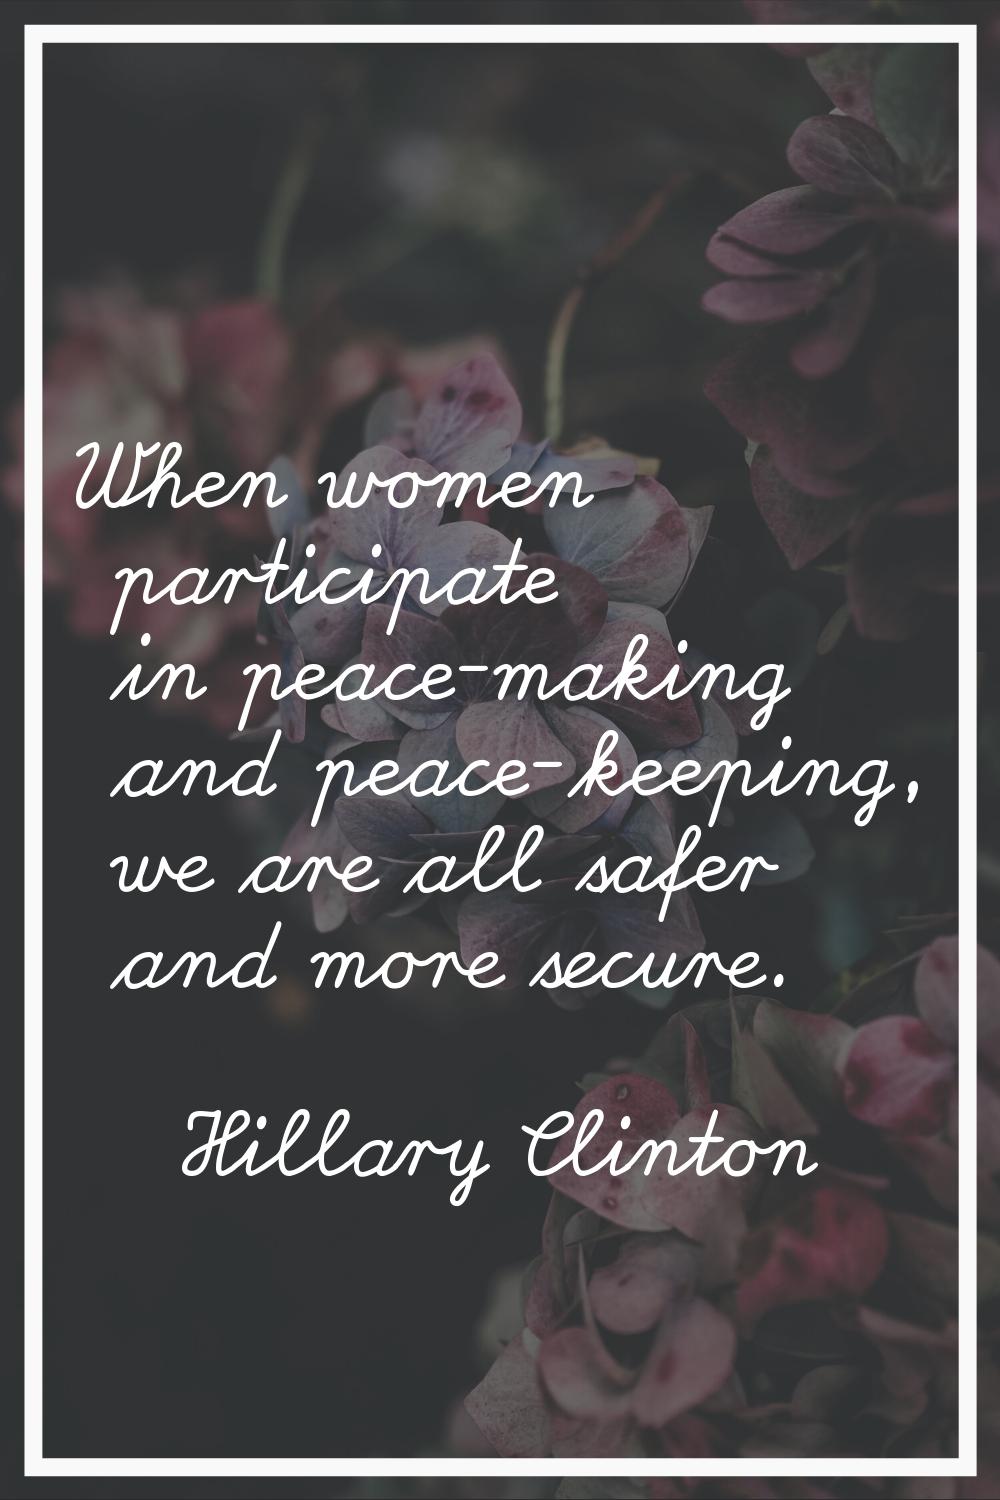 When women participate in peace-making and peace-keeping, we are all safer and more secure.